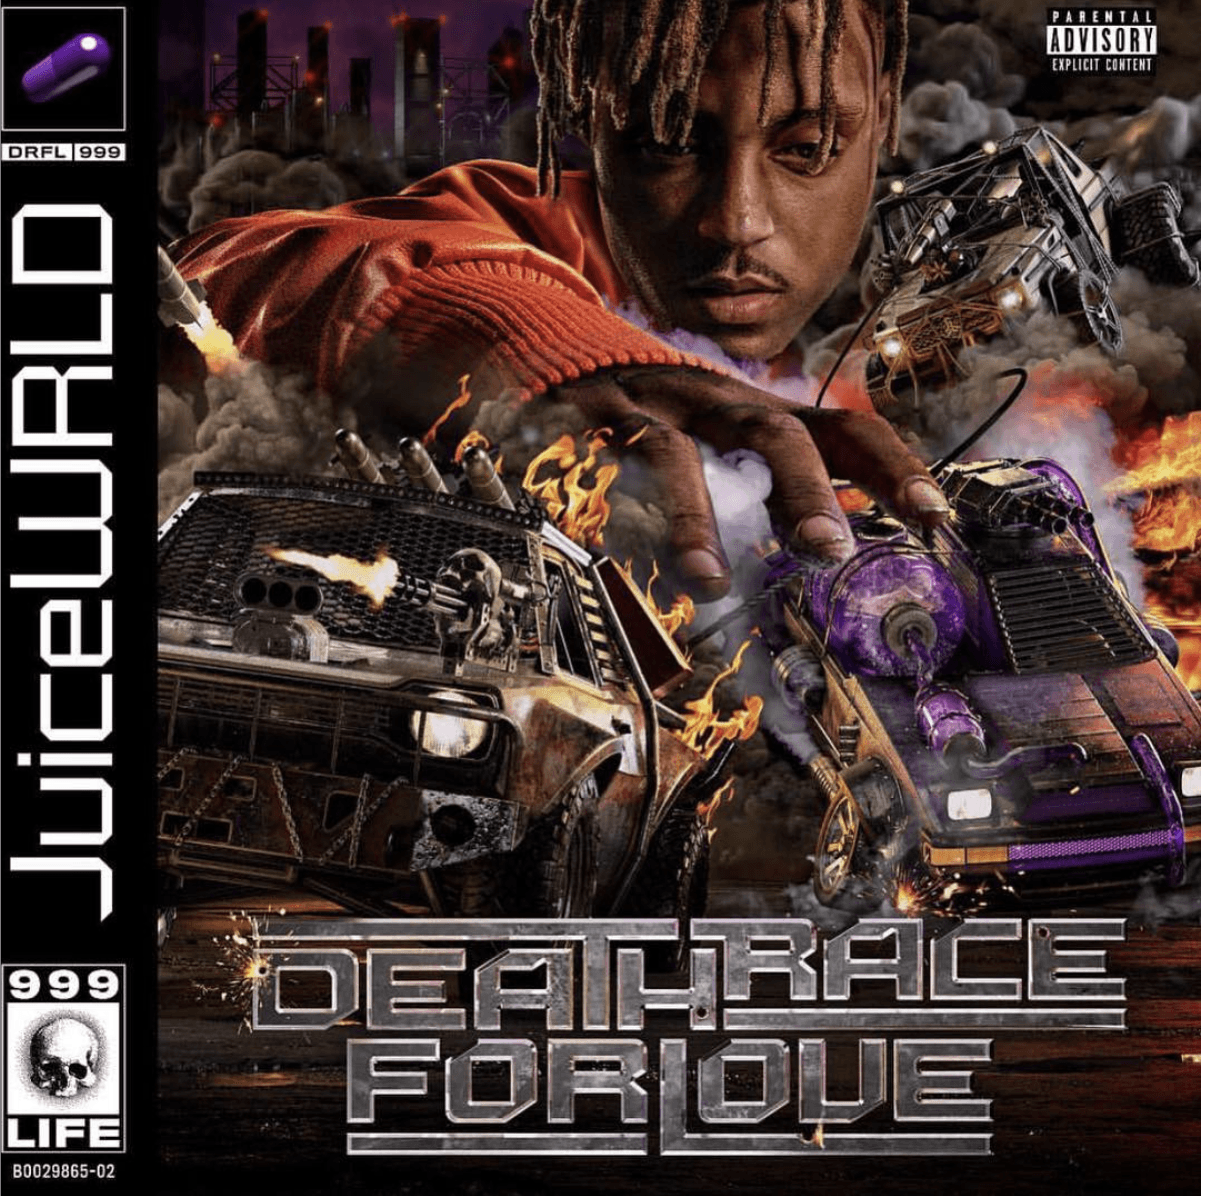 Juice Wrld Drops A Deathrace for Love feat. Young Thug & More